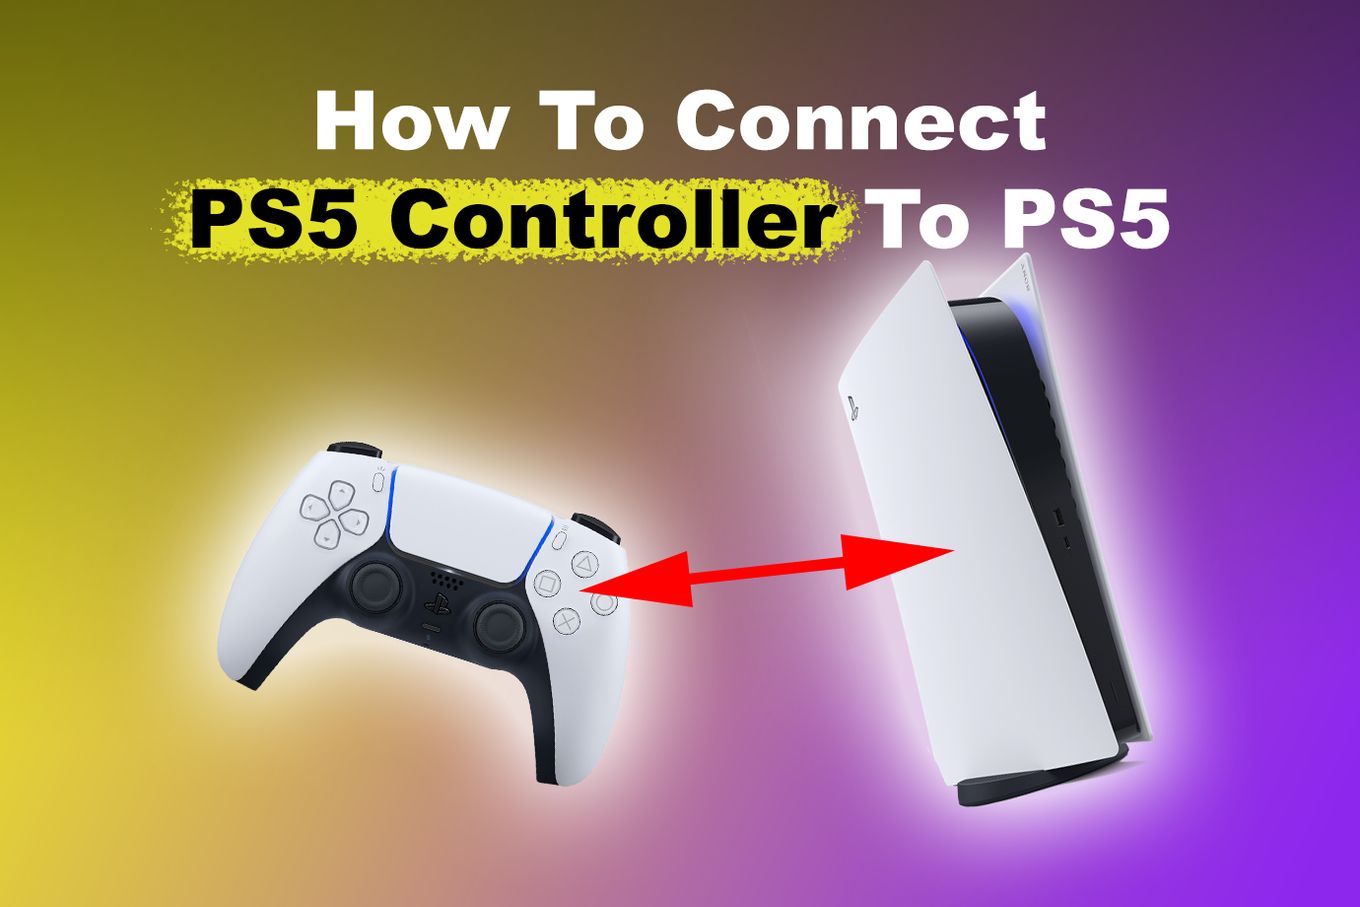 I am using a PS5 controller and the swiping function on the